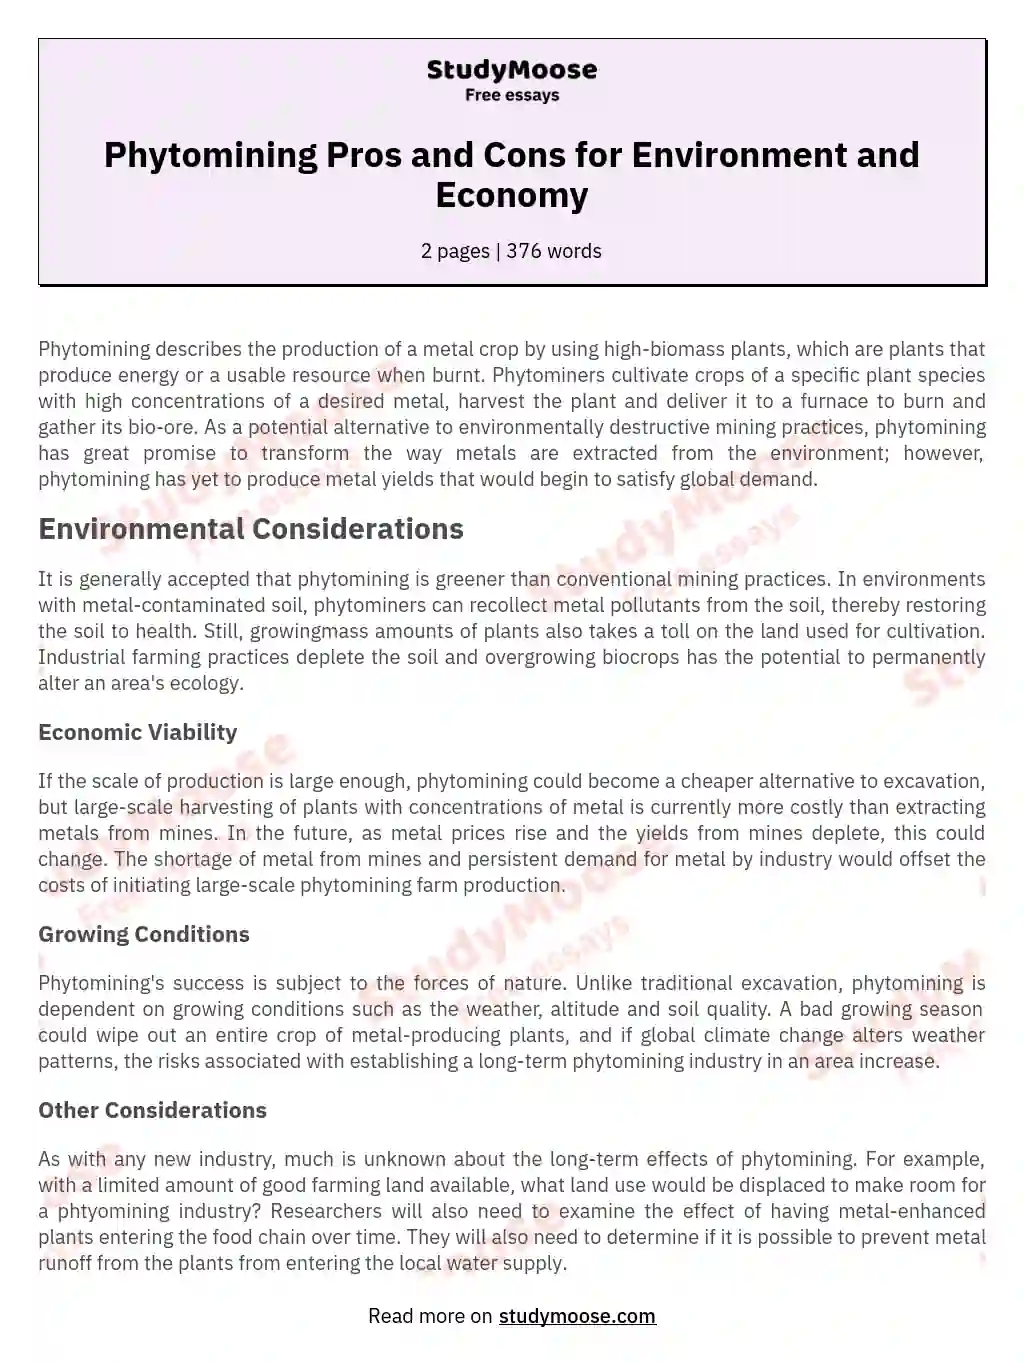 Phytomining Pros and Cons for Environment and Economy